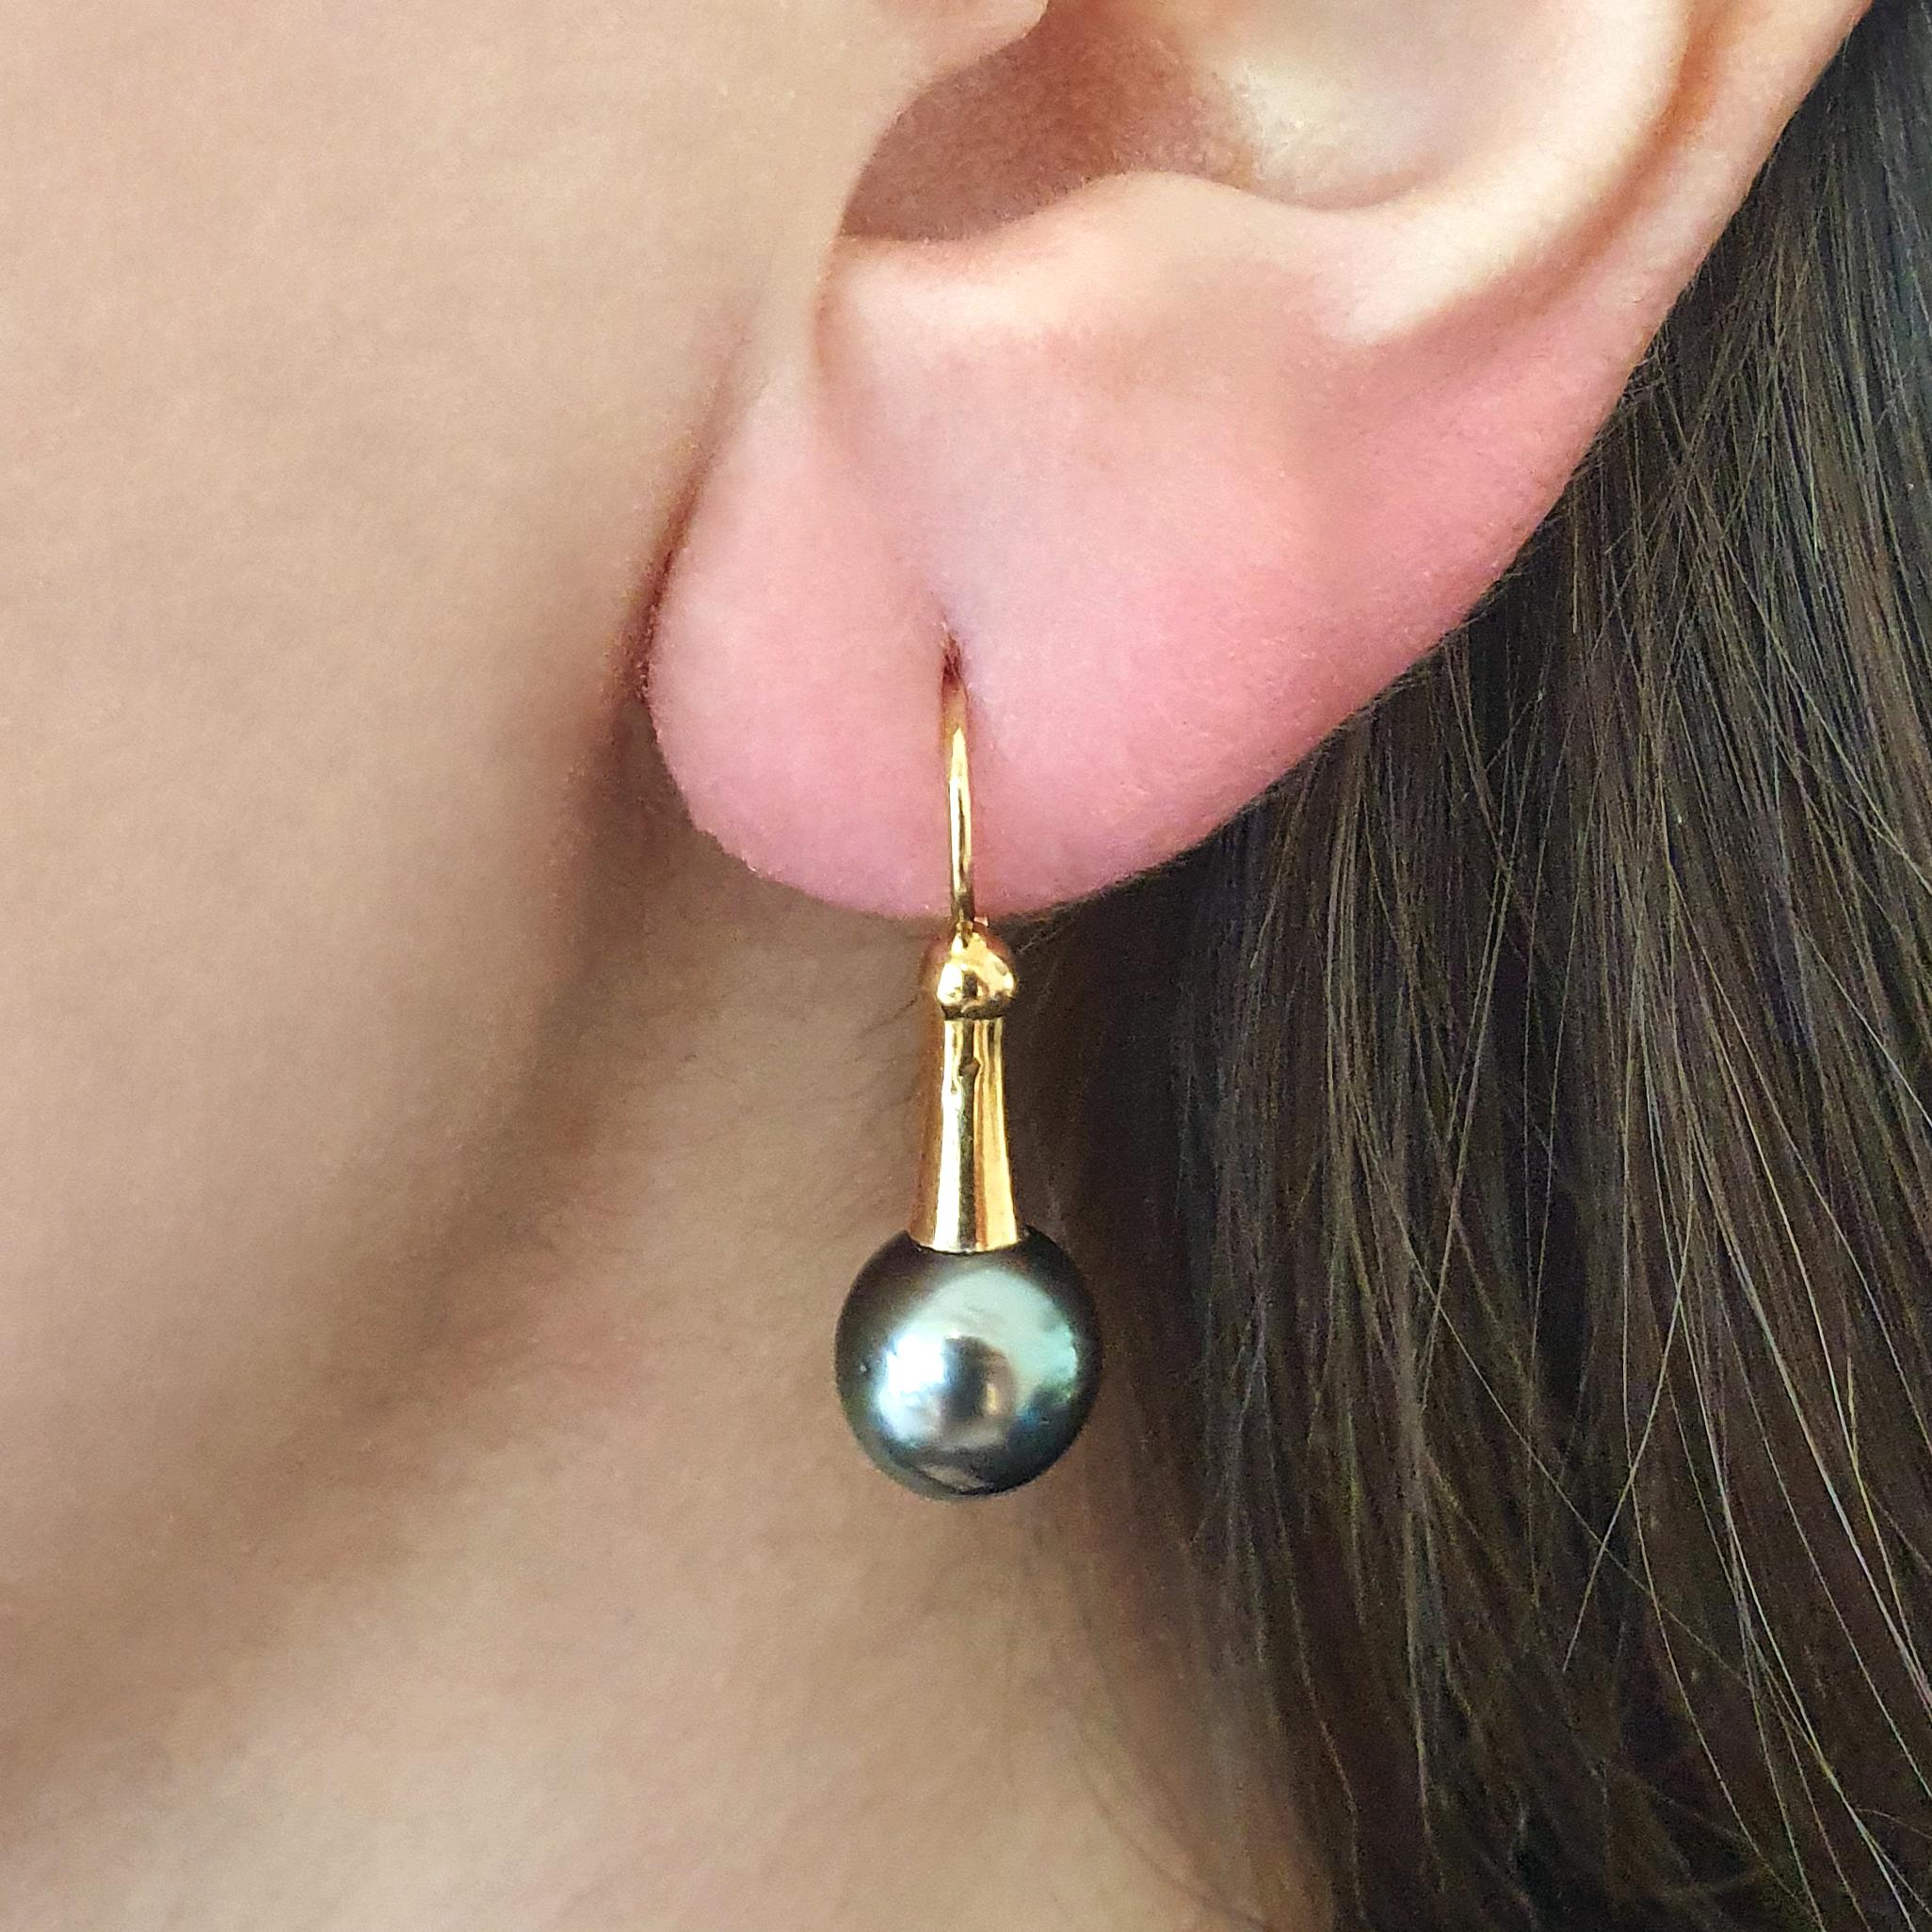 Black Pearl on Yellow Gold 18K Earrings.
These stunning earrings are a true embodiment of elegance and sophistication. Each earring features a lustrous black pearl, renowned for its timeless beauty and symbolic representation of wisdom and purity.